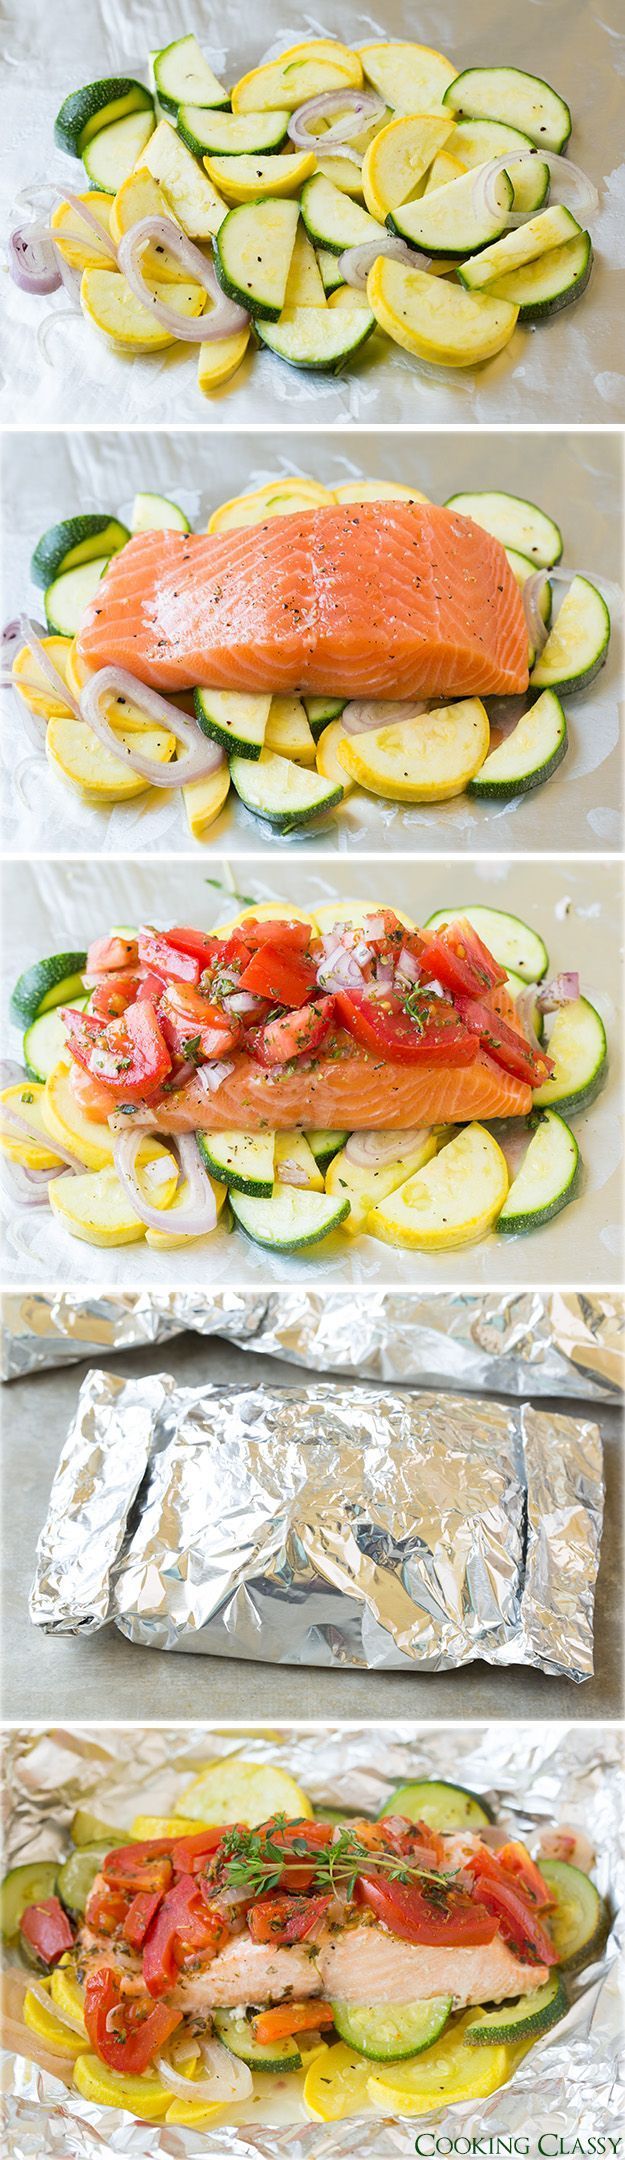 Salmon and Summer Veggies in Foil – so easy to make, perfectly flavorful and clean